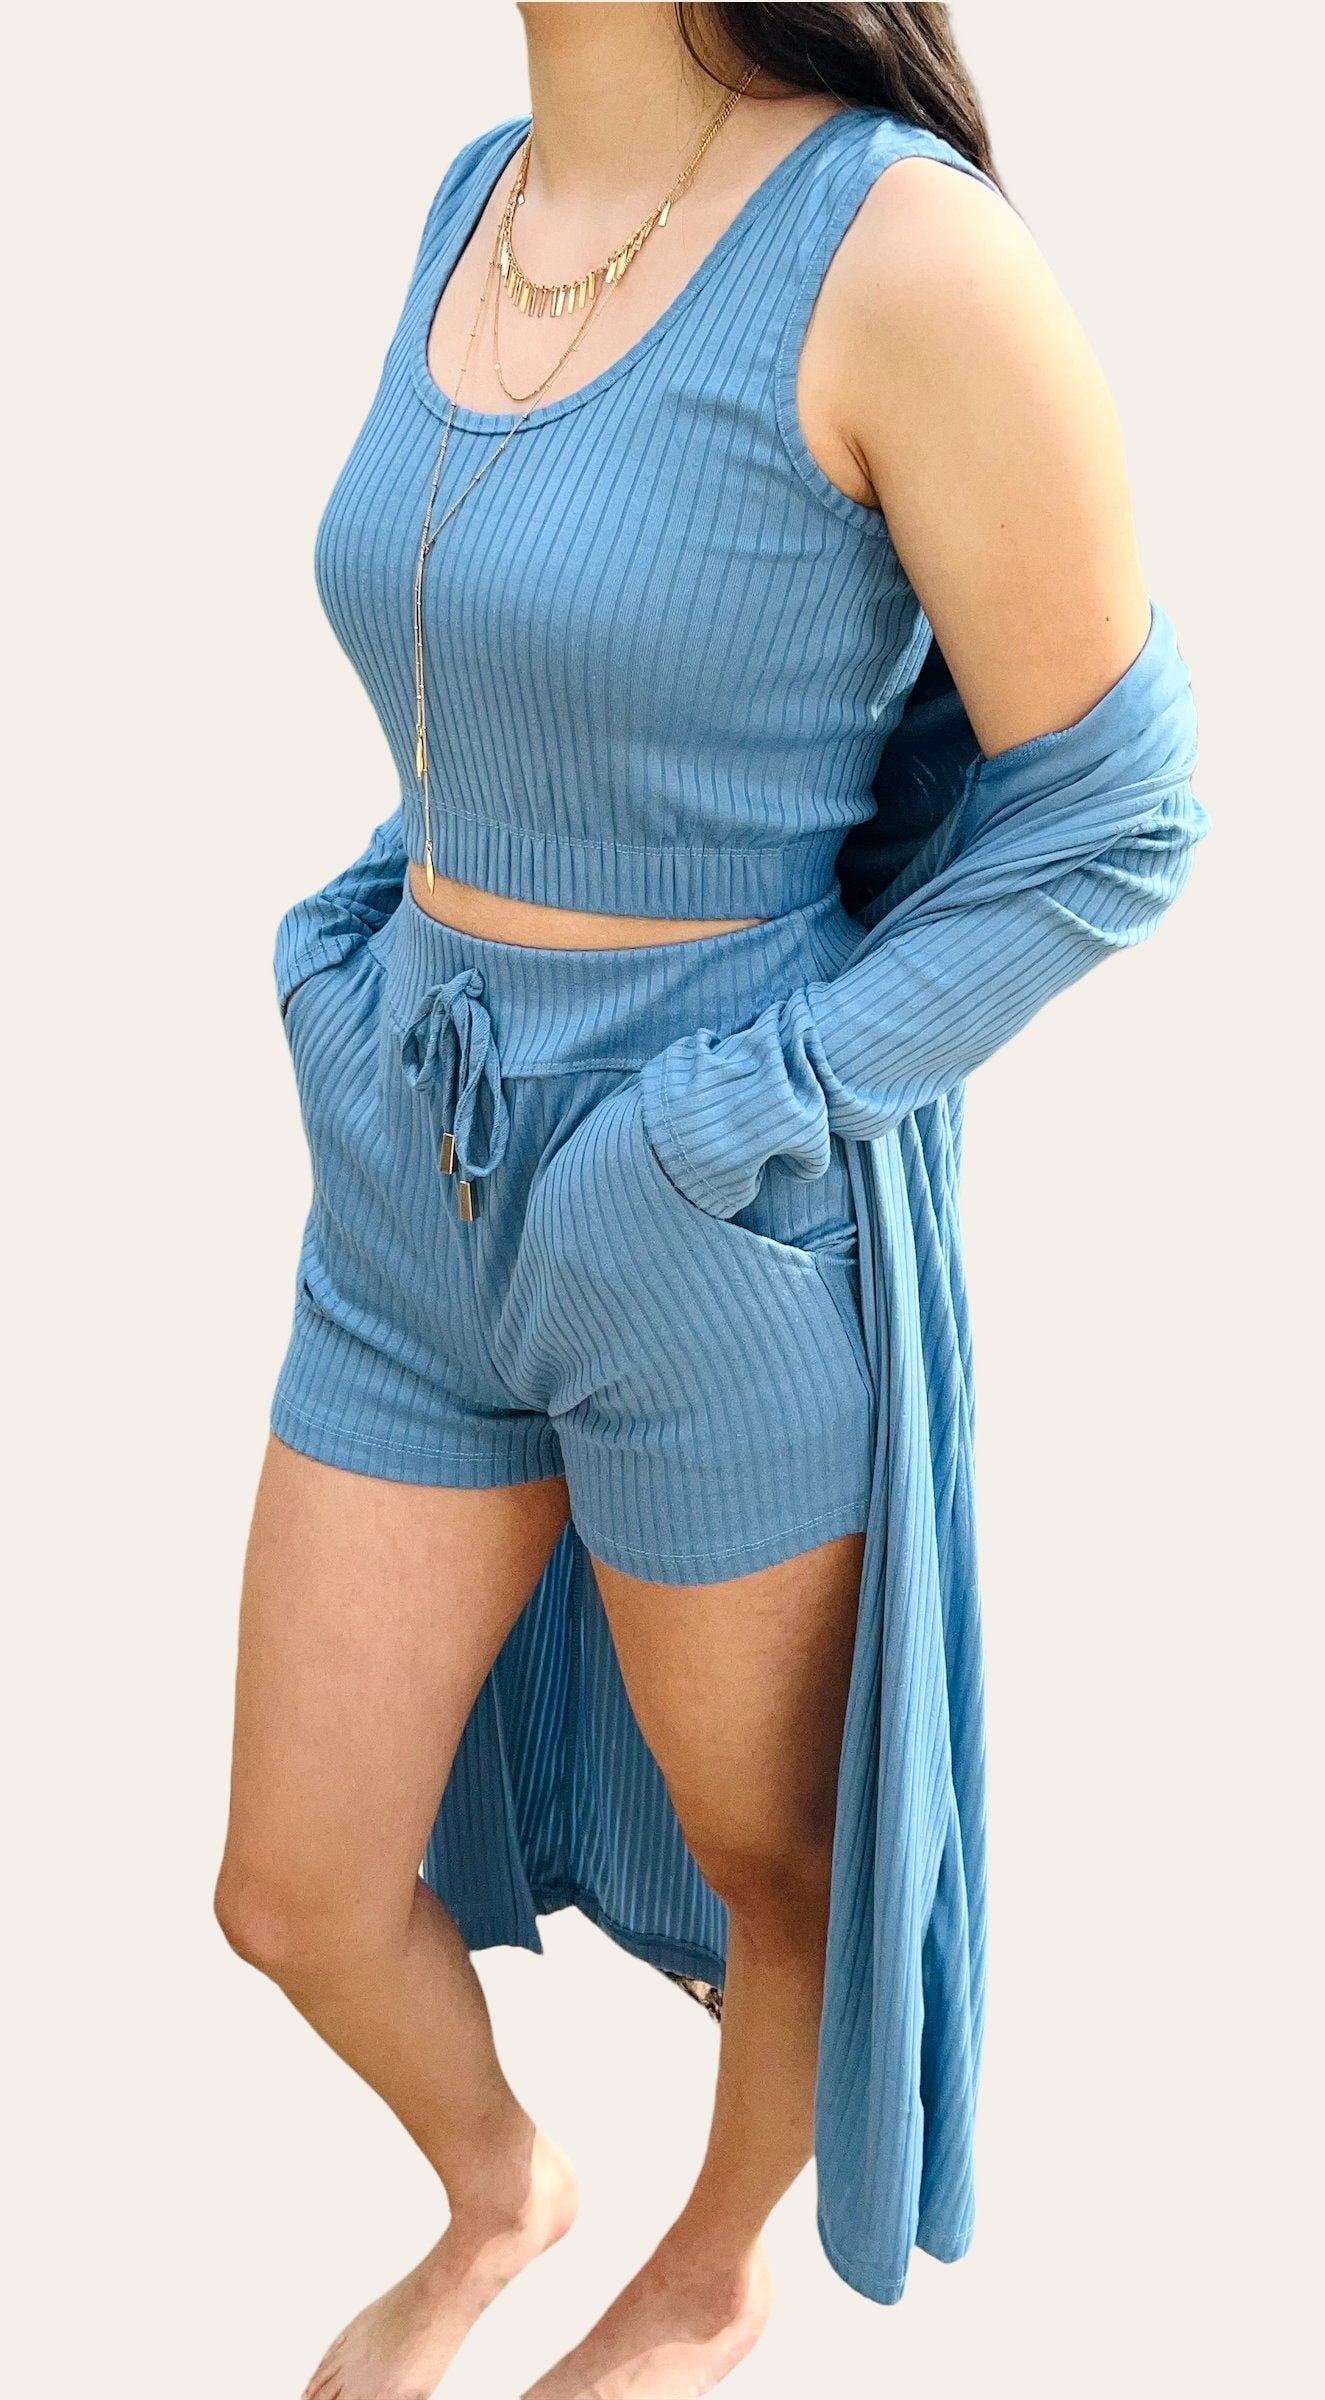 Baby Blue Shorts - Offbeat Boutique